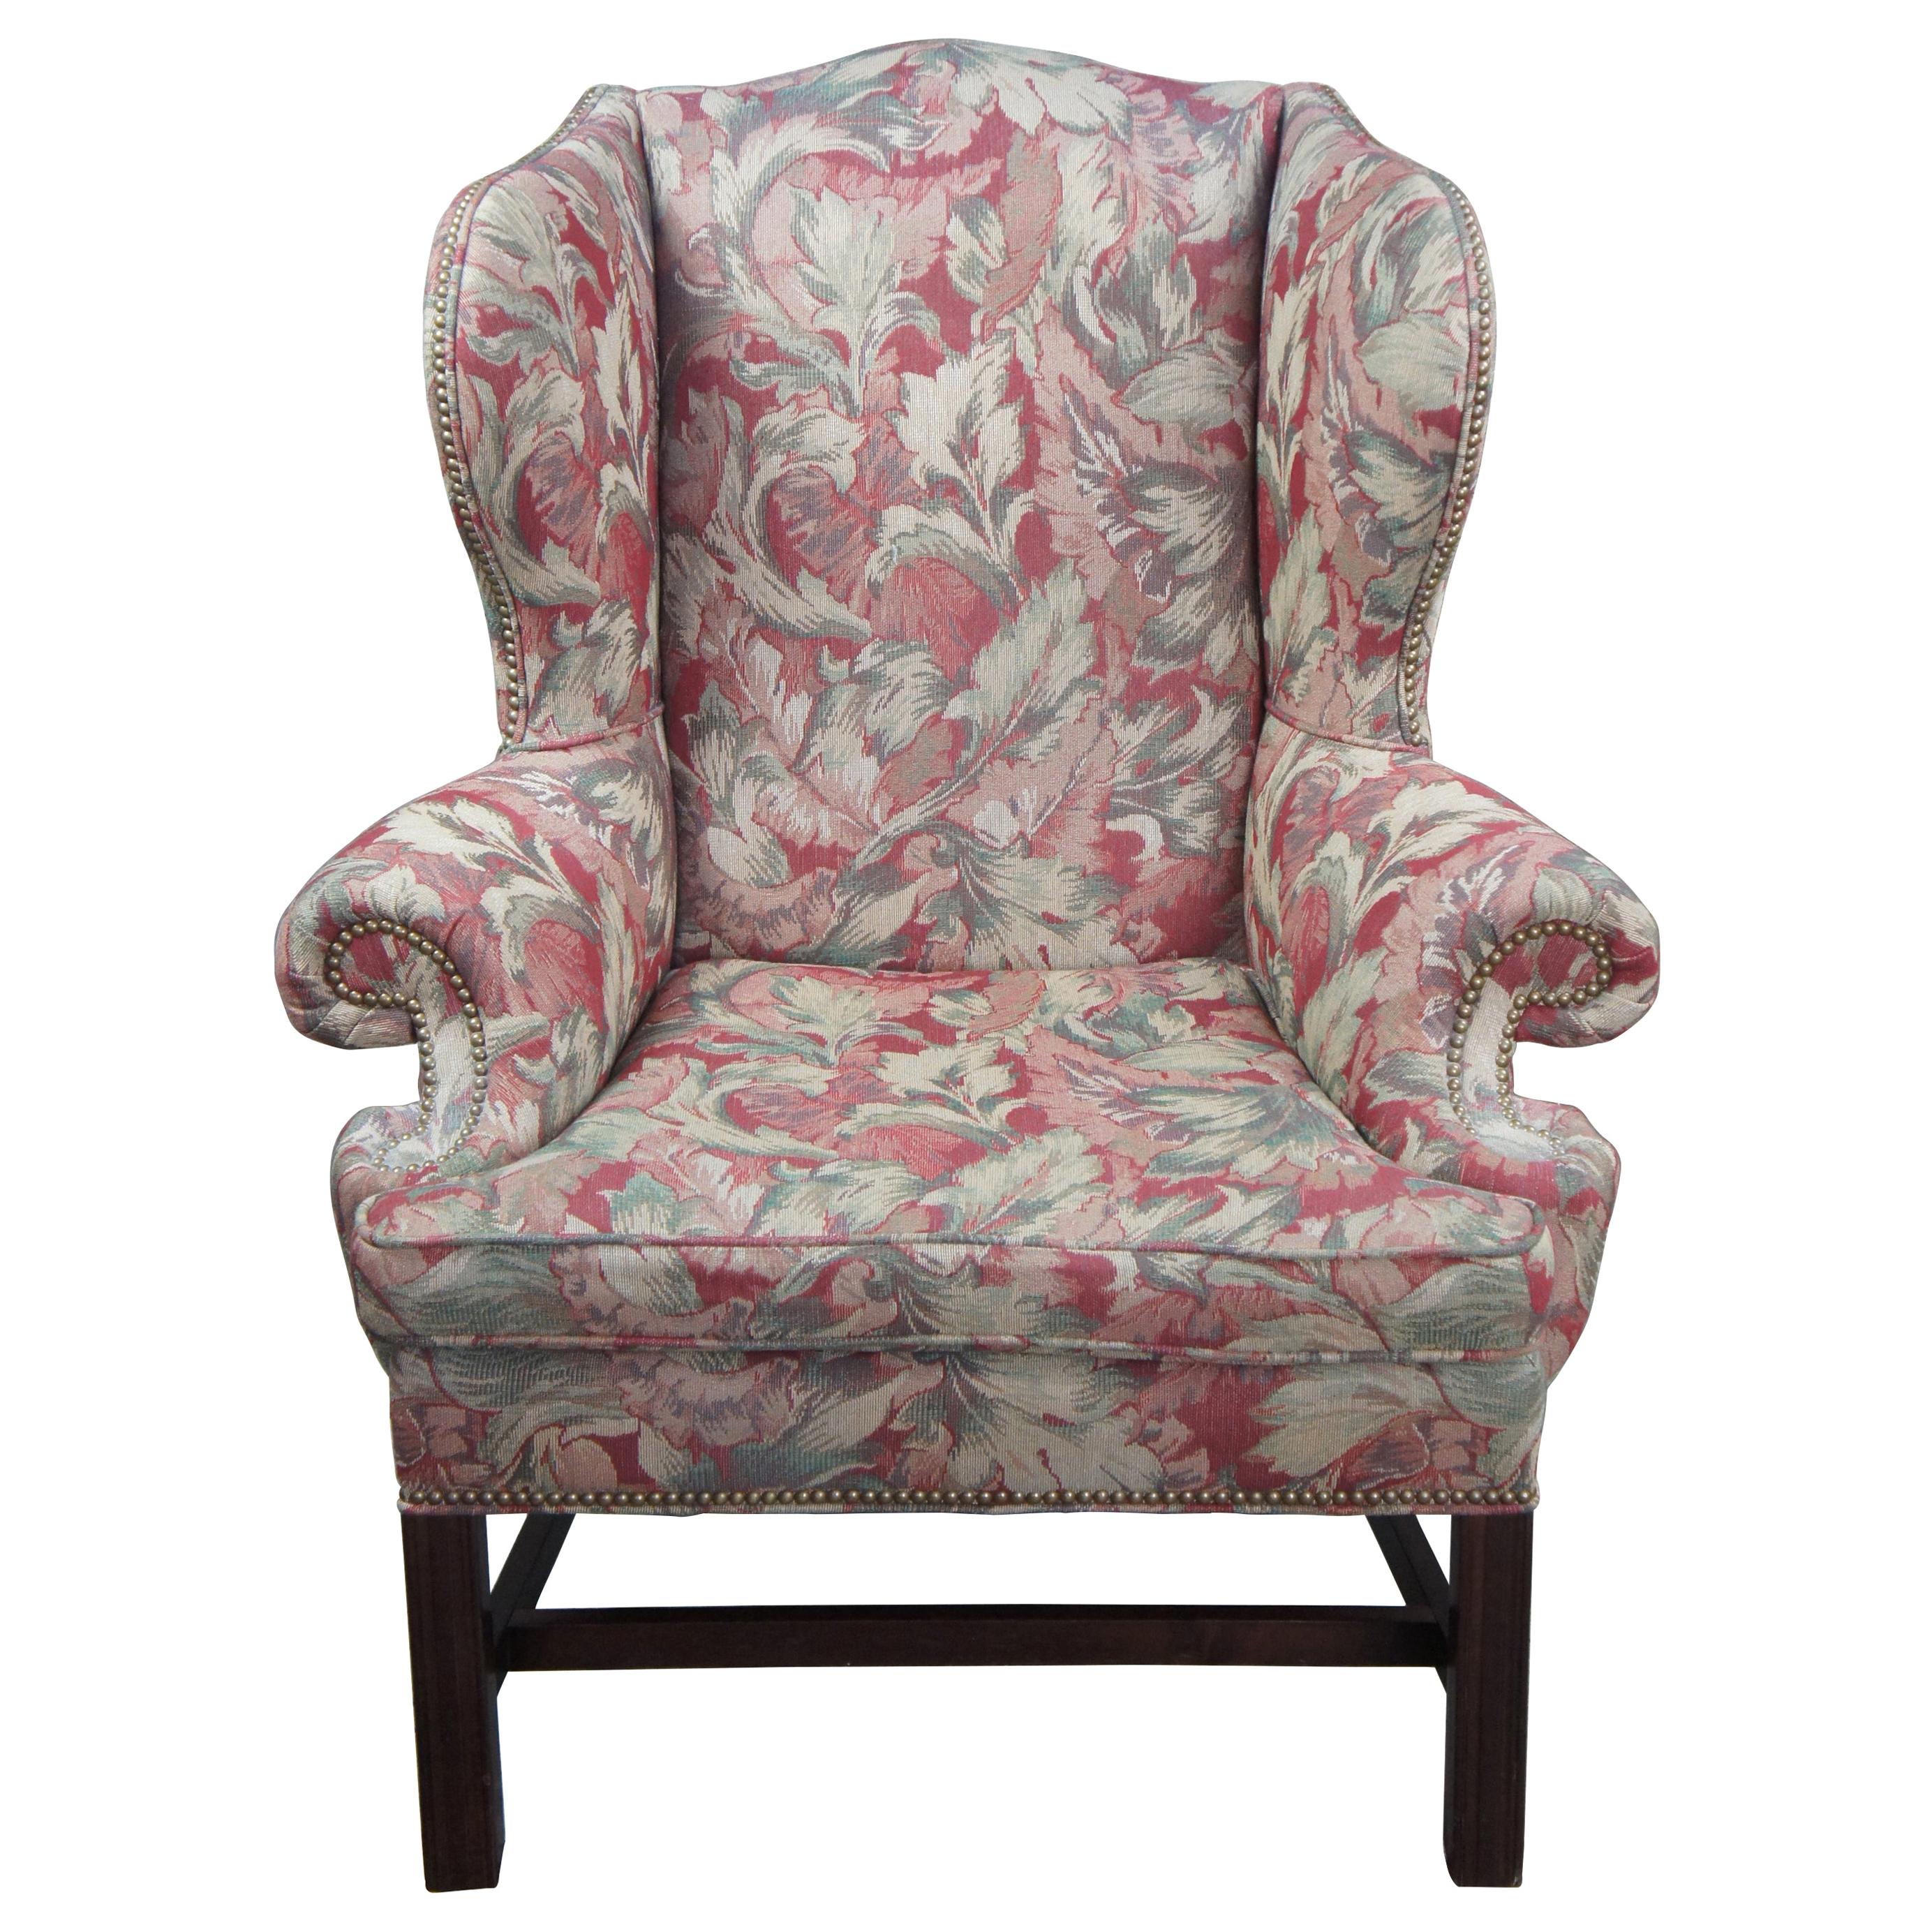 Century Furniture Chippendale Style Floral Wingback Armchair with Nailhead Trim